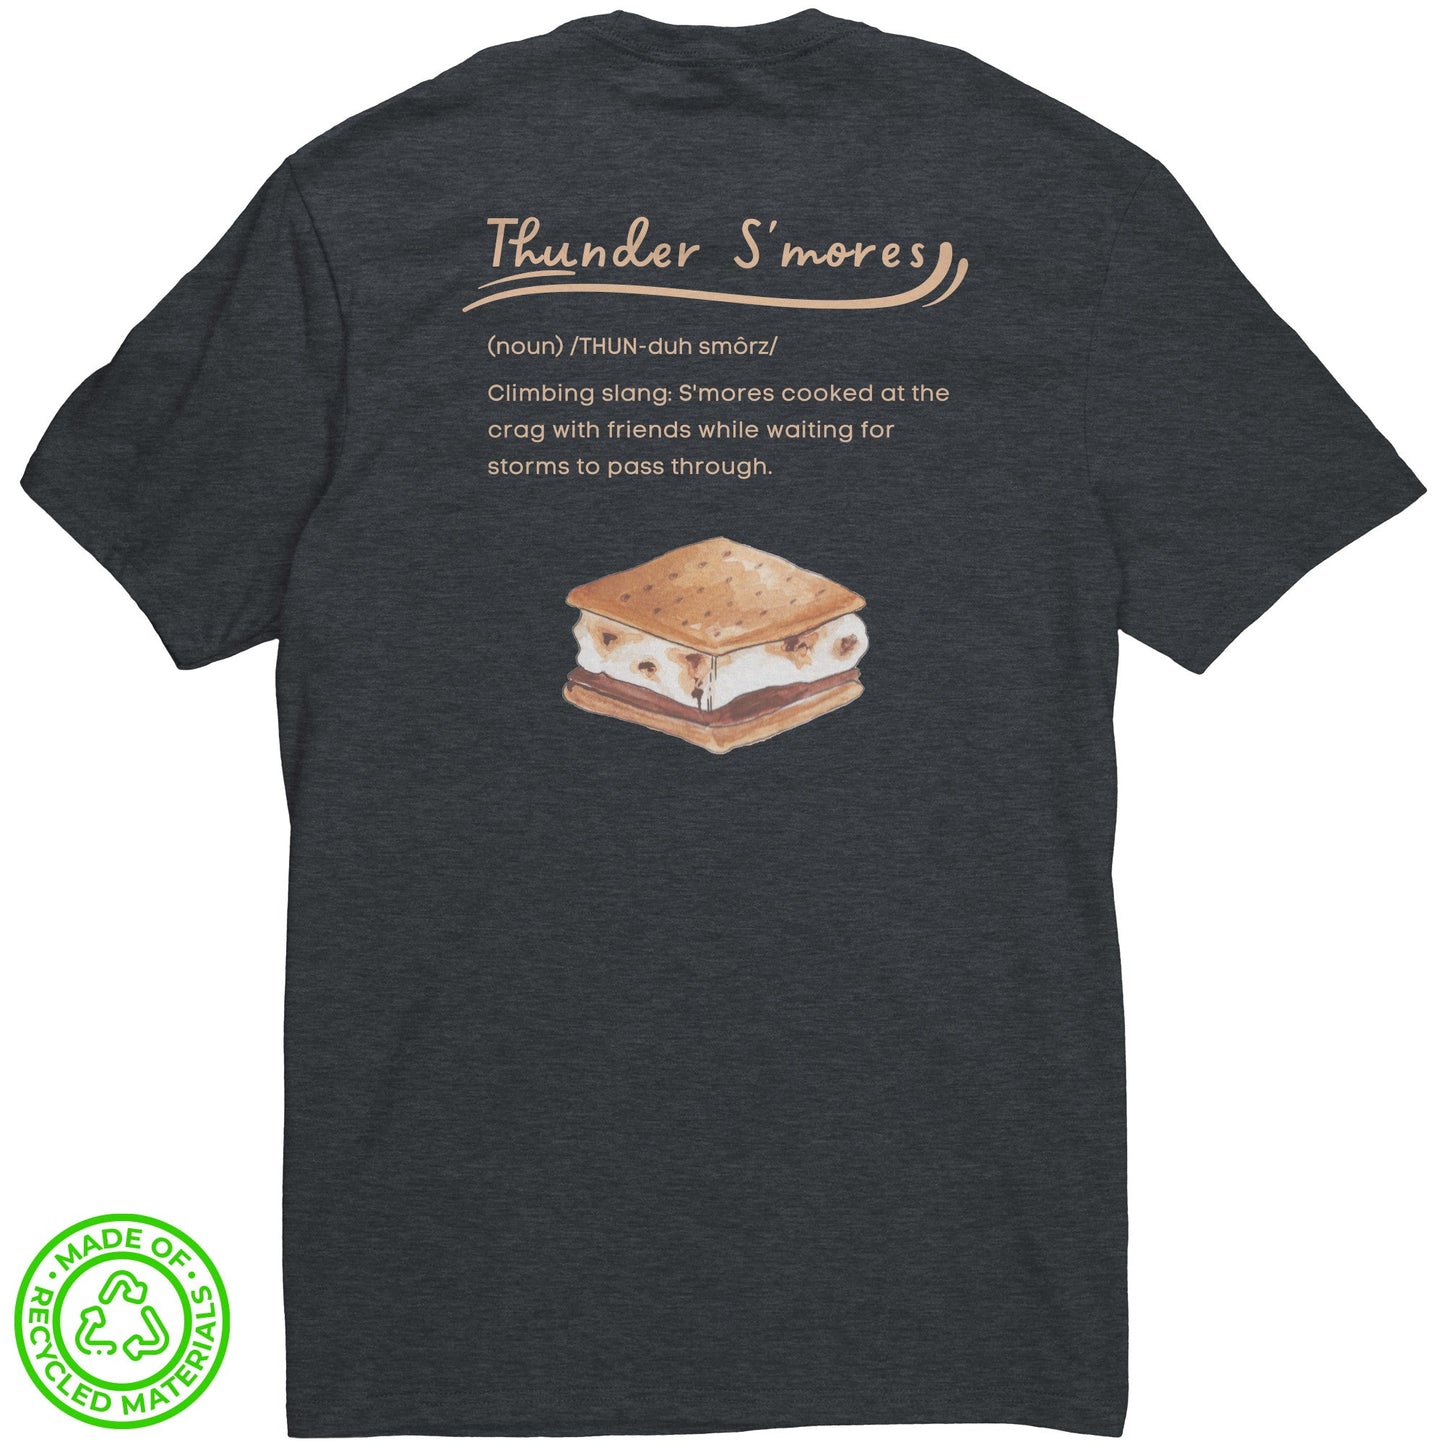 Eco-Friendly Re-Tee (Thunder S'mores)